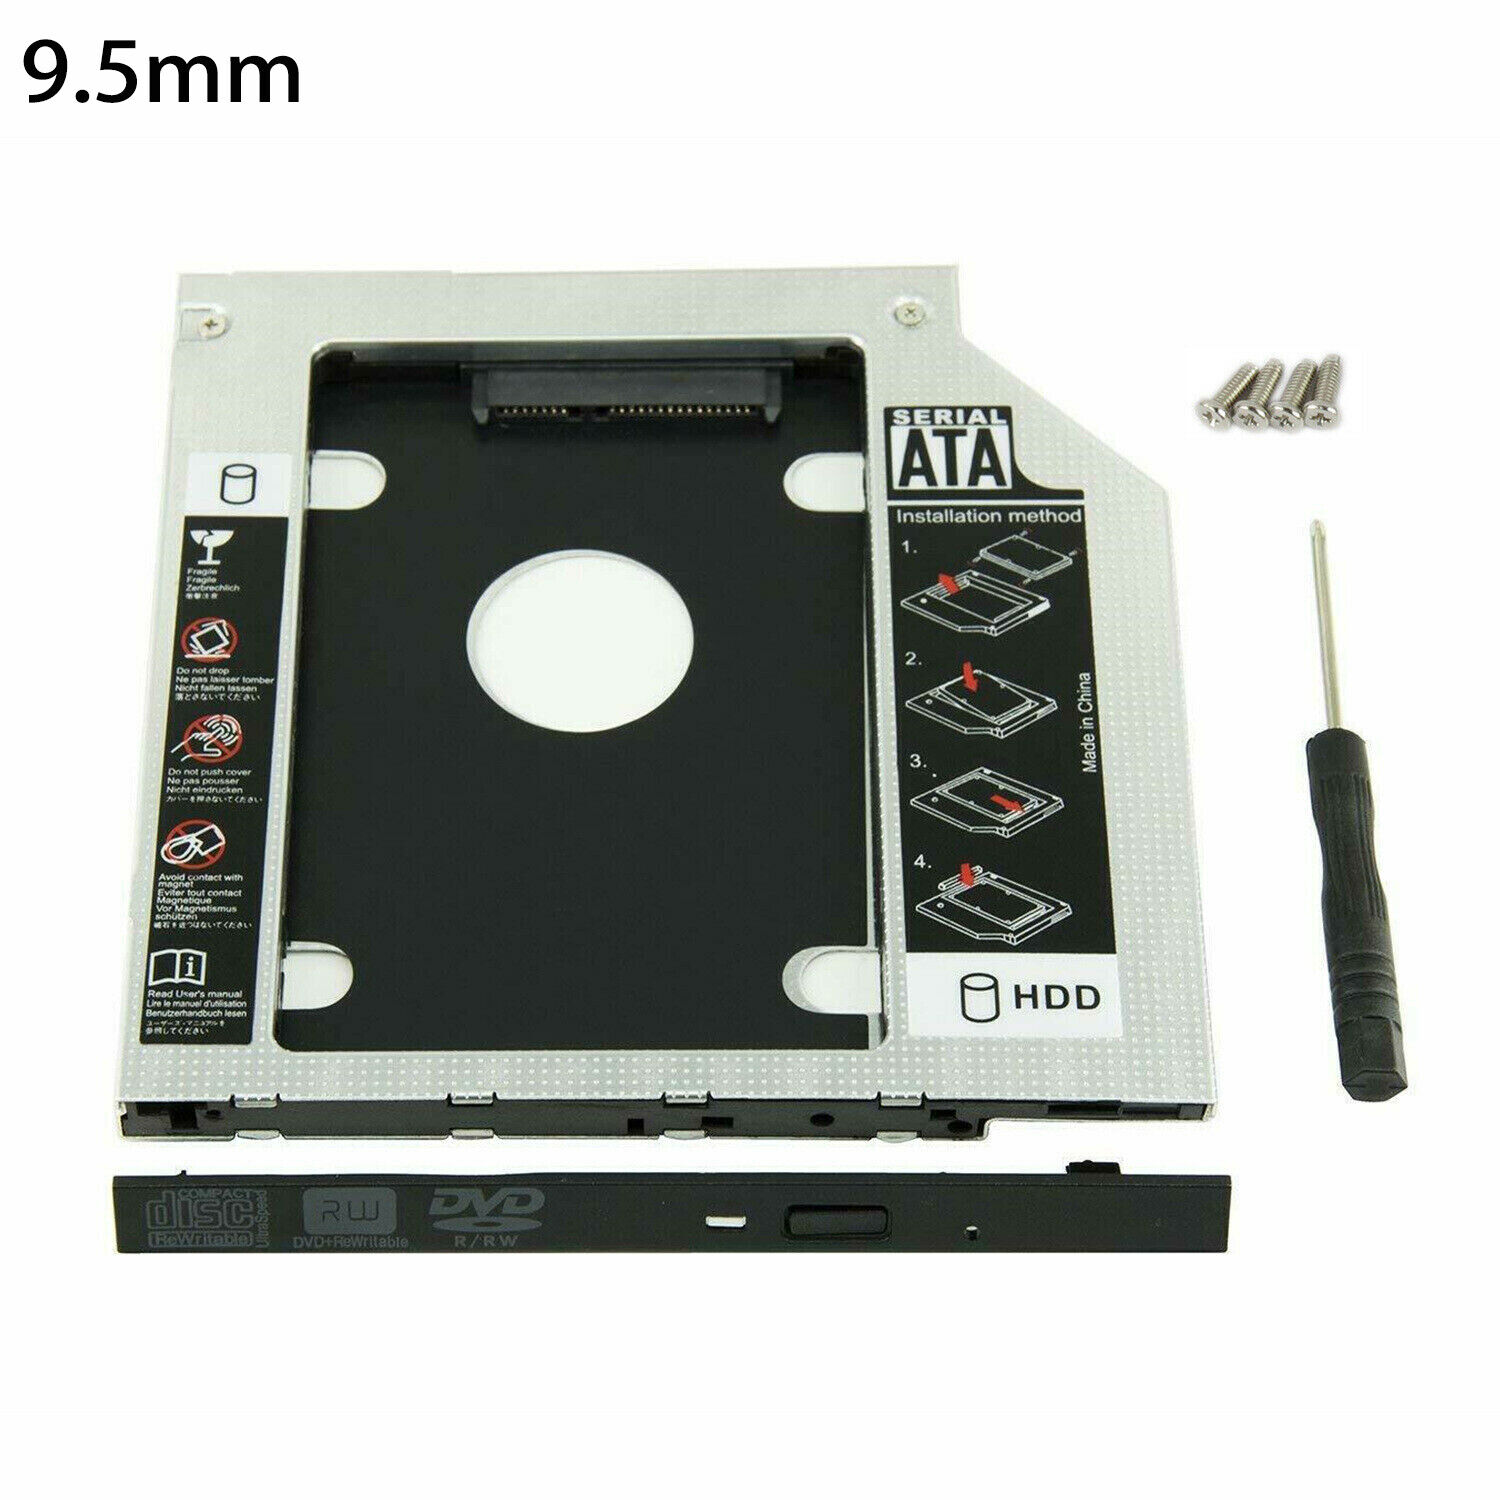 9.5mm Universal For SATA 2nd HDD SSD Hard Drive Caddy CD/DVD-ROM Optical Bay New